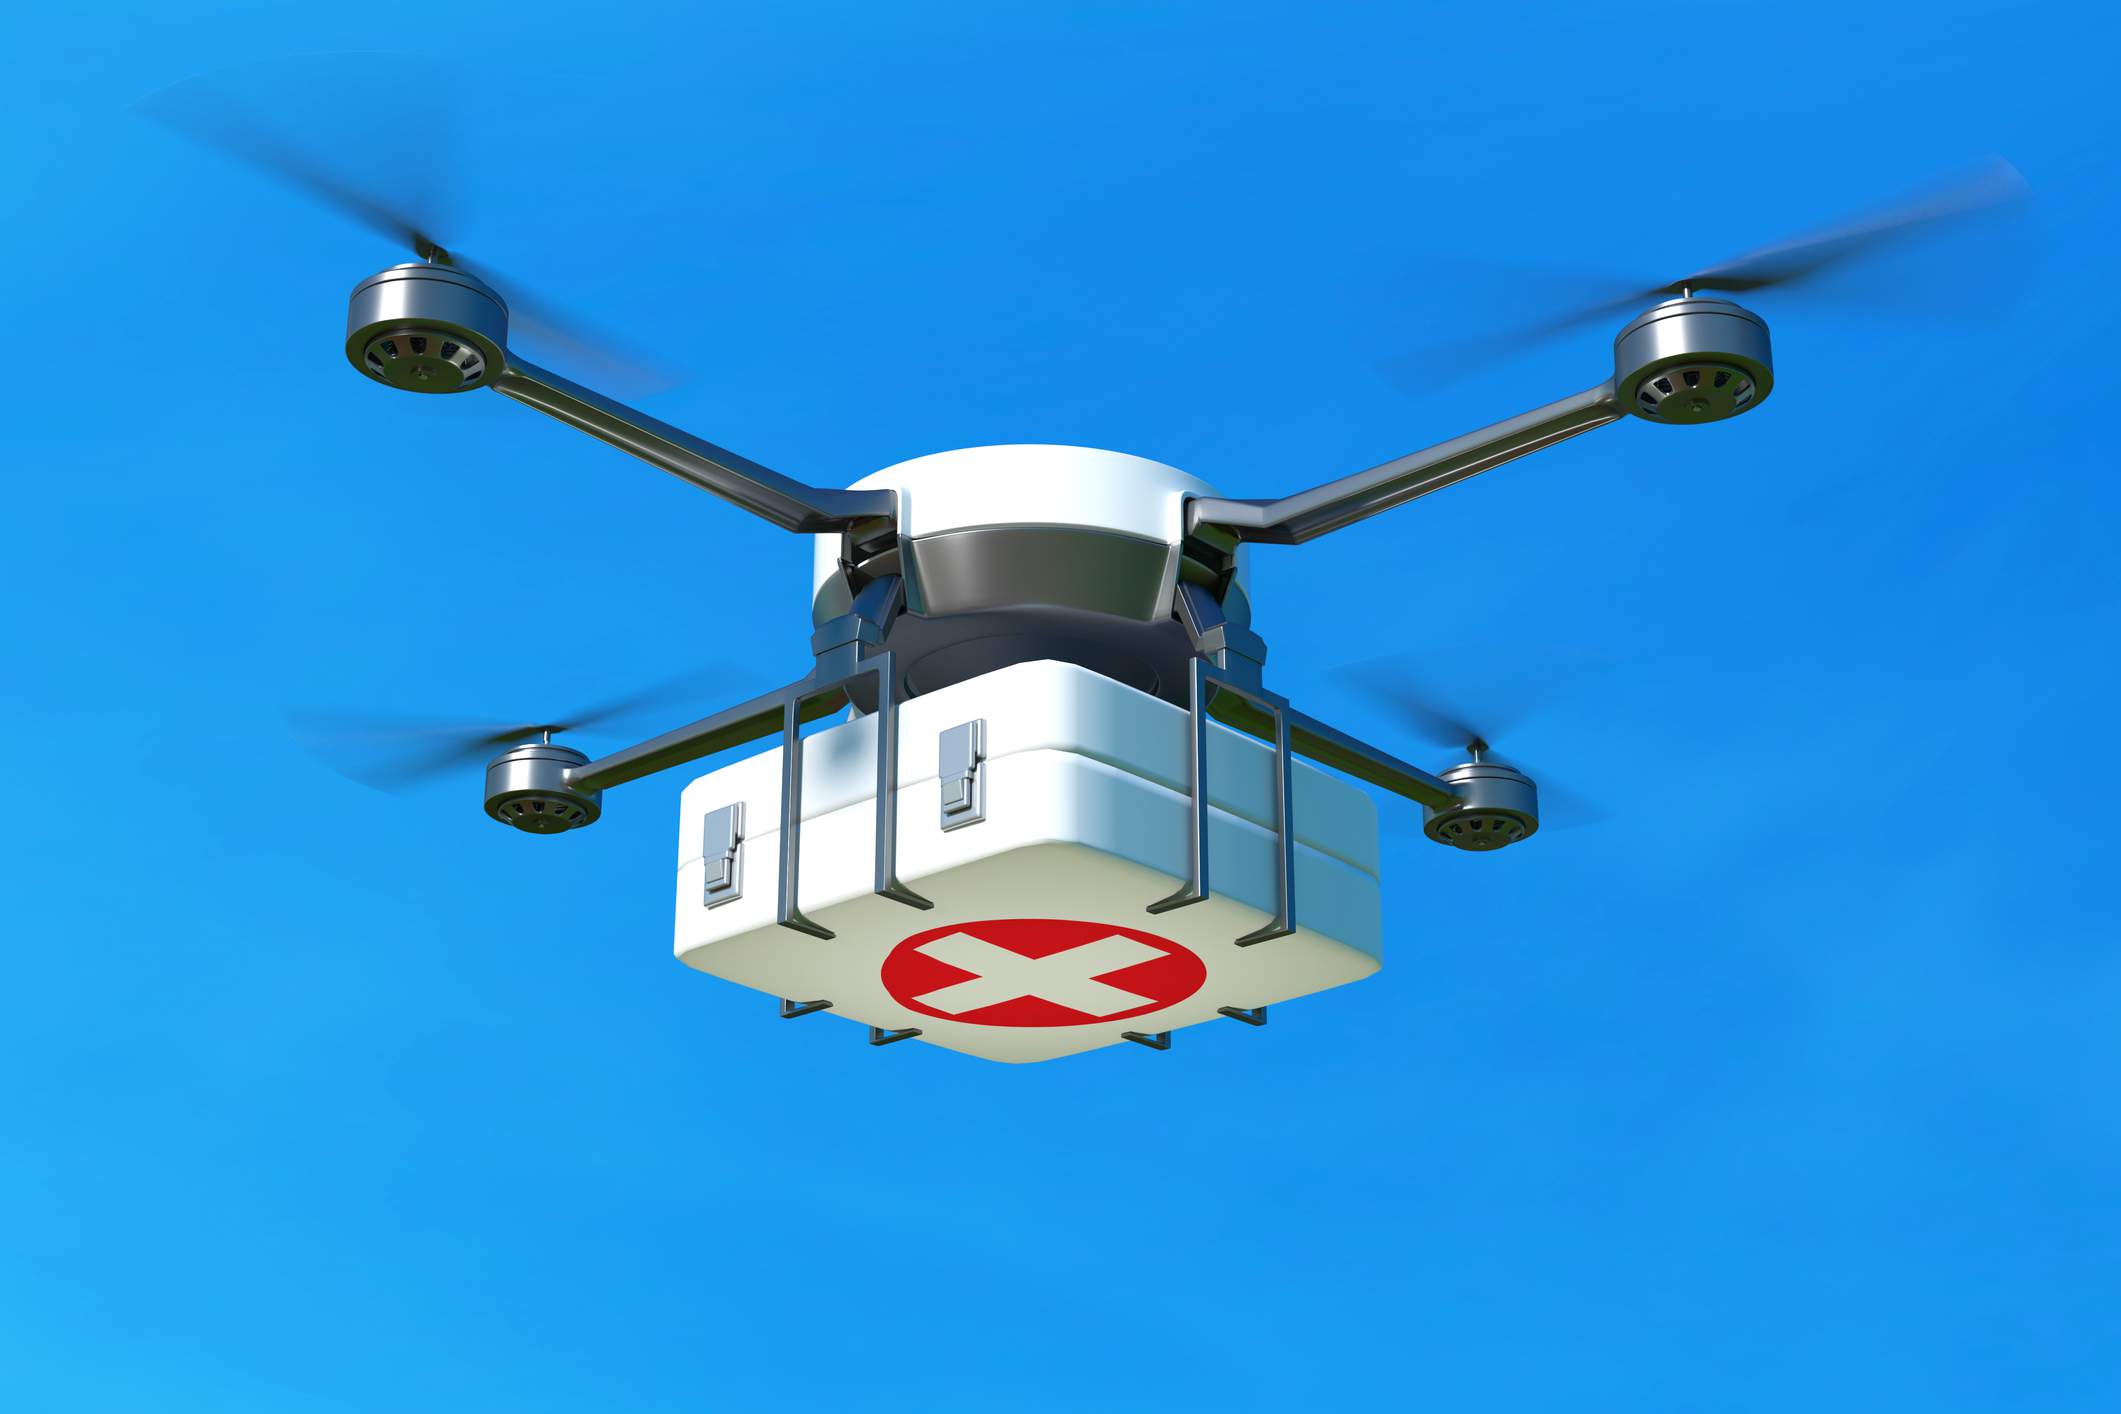 How drones could revolutionize care delivery at your hospital